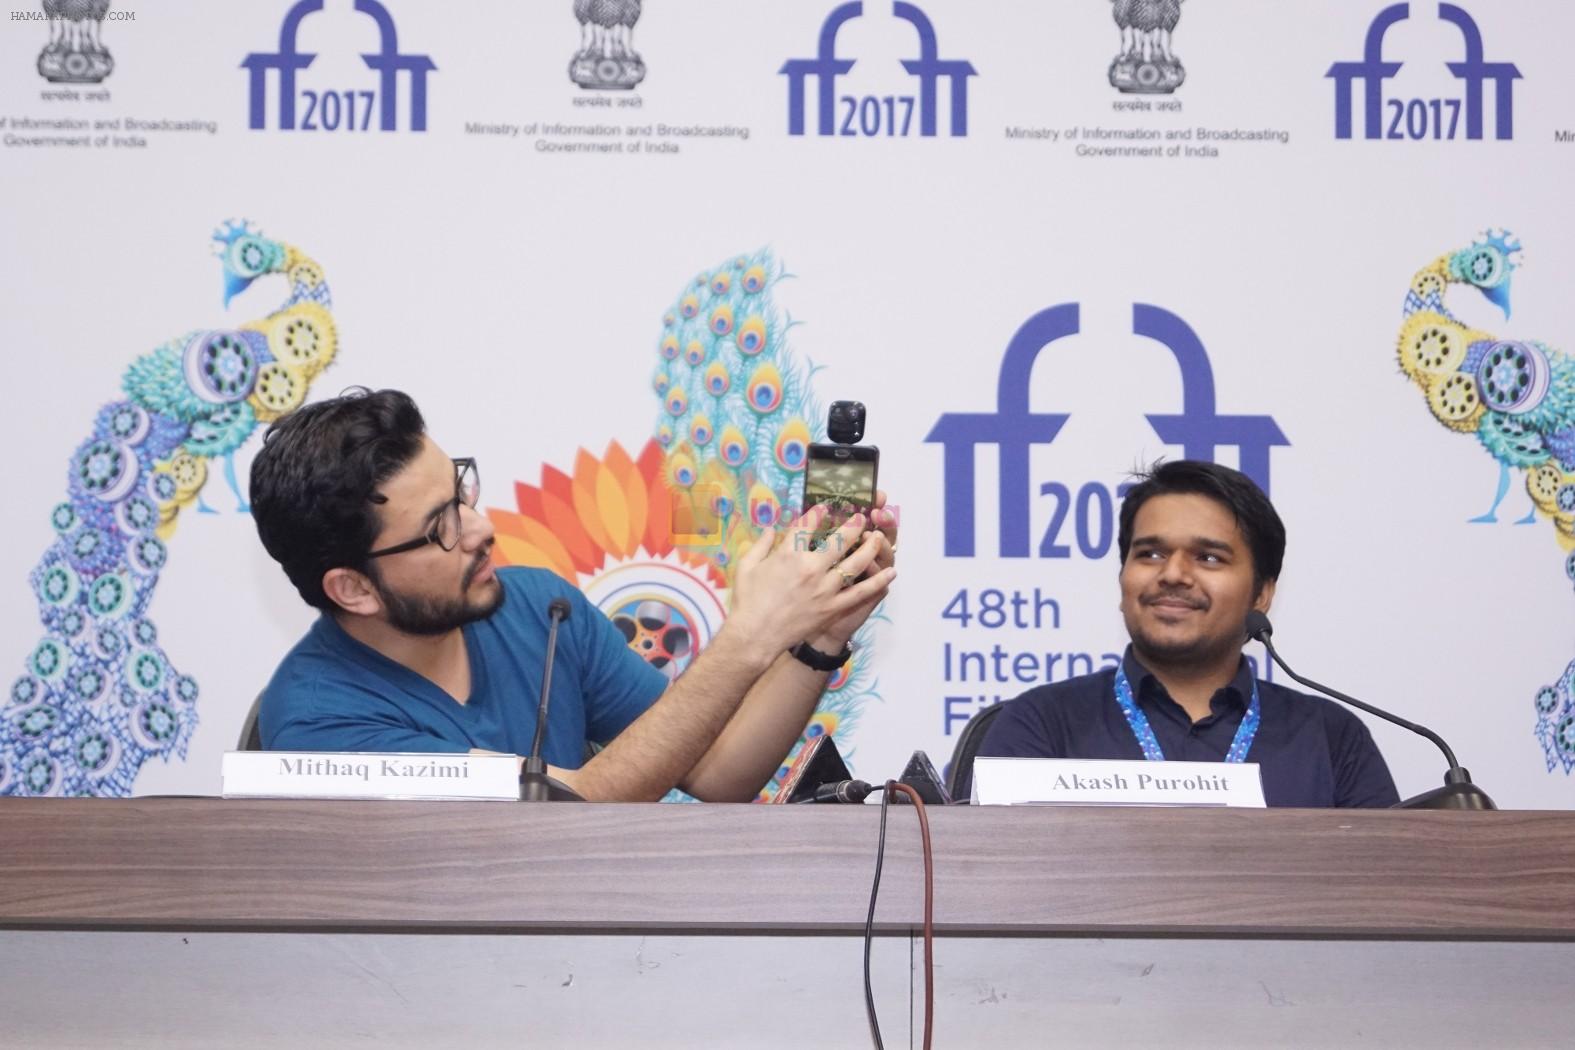 at the Press Conference - Media Tech Start-up Expo (IFFI 2017) on 27th Nov 2017